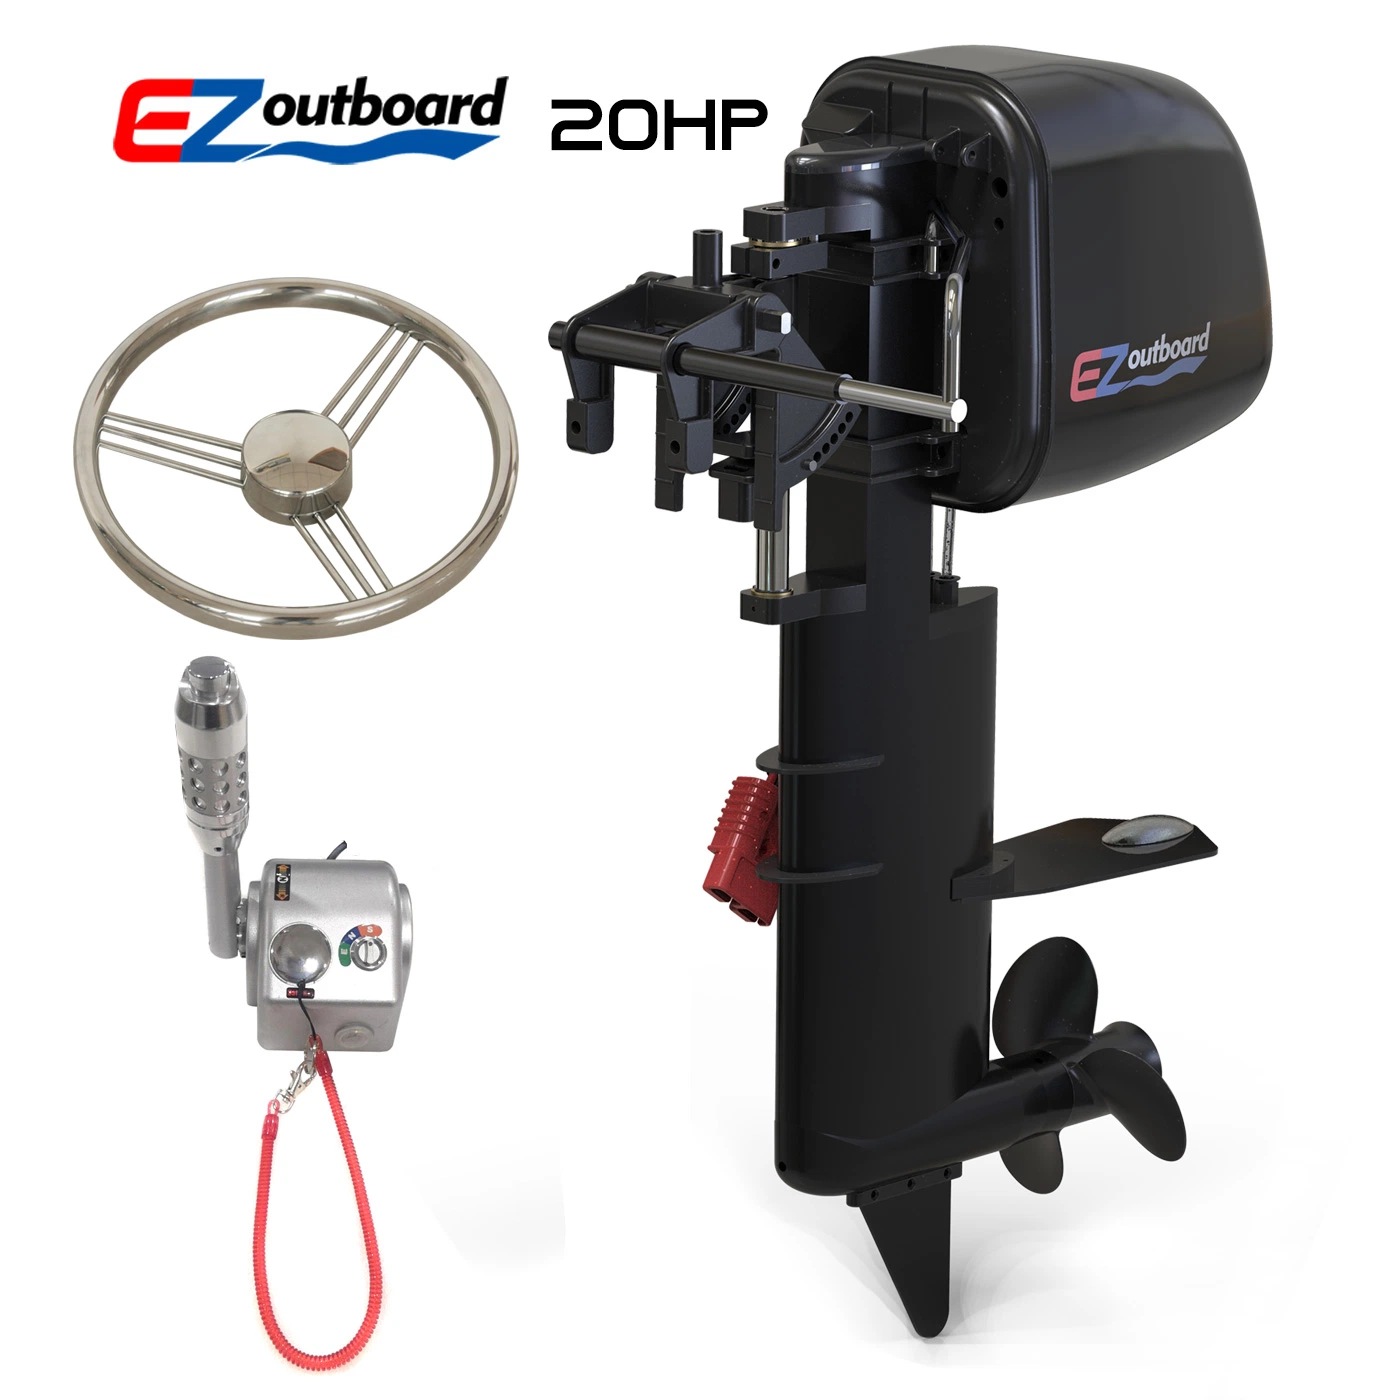 Gear-less, Brushless, Shaft-less design EZ Outboard Sports Series 6HP 10HP 20HP Electric Marine Outboard Motor Engine,High Powered Electric Propulsion System